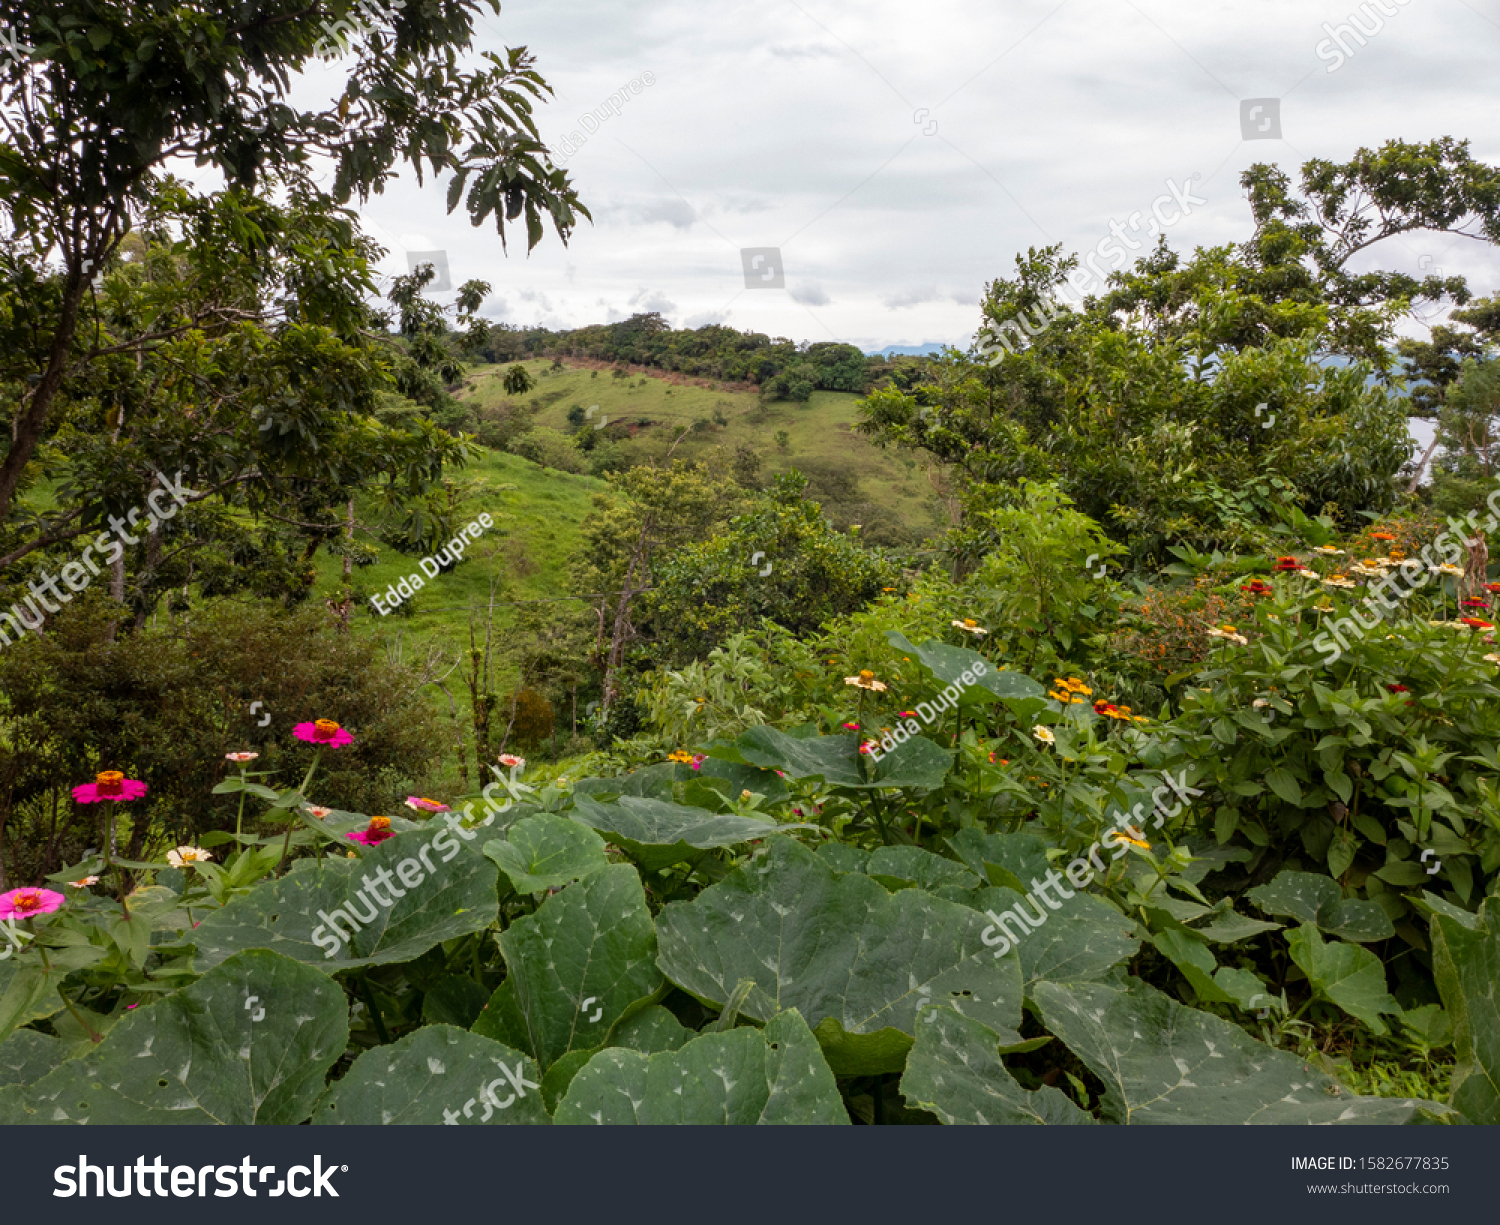 Hilly landscape in the north of Costa Rica with its lush vegetation #1582677835